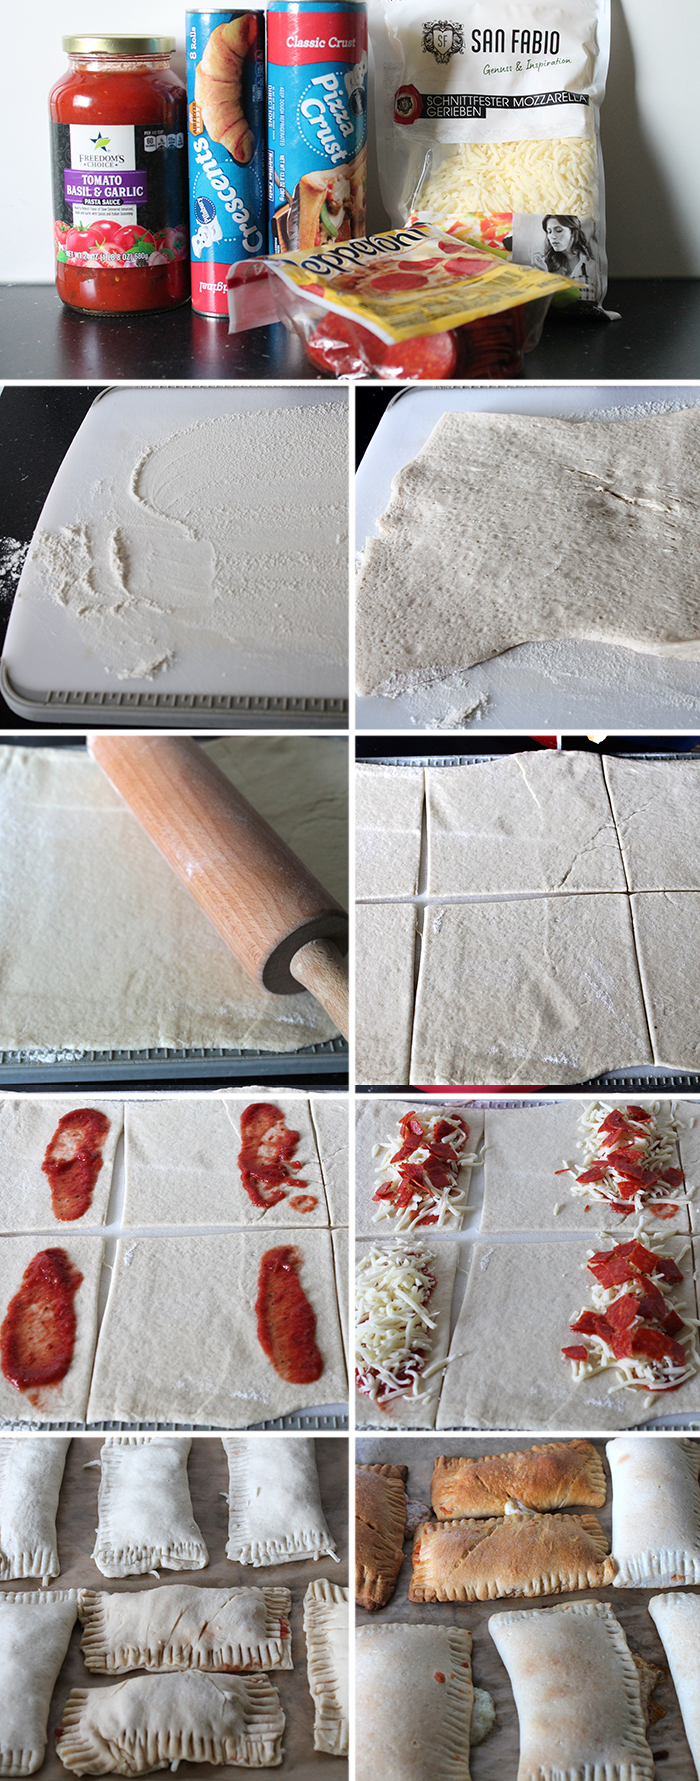 9-photo picture collage of step-by-step photos of how to make Easy Homemade Pizza Pockets.